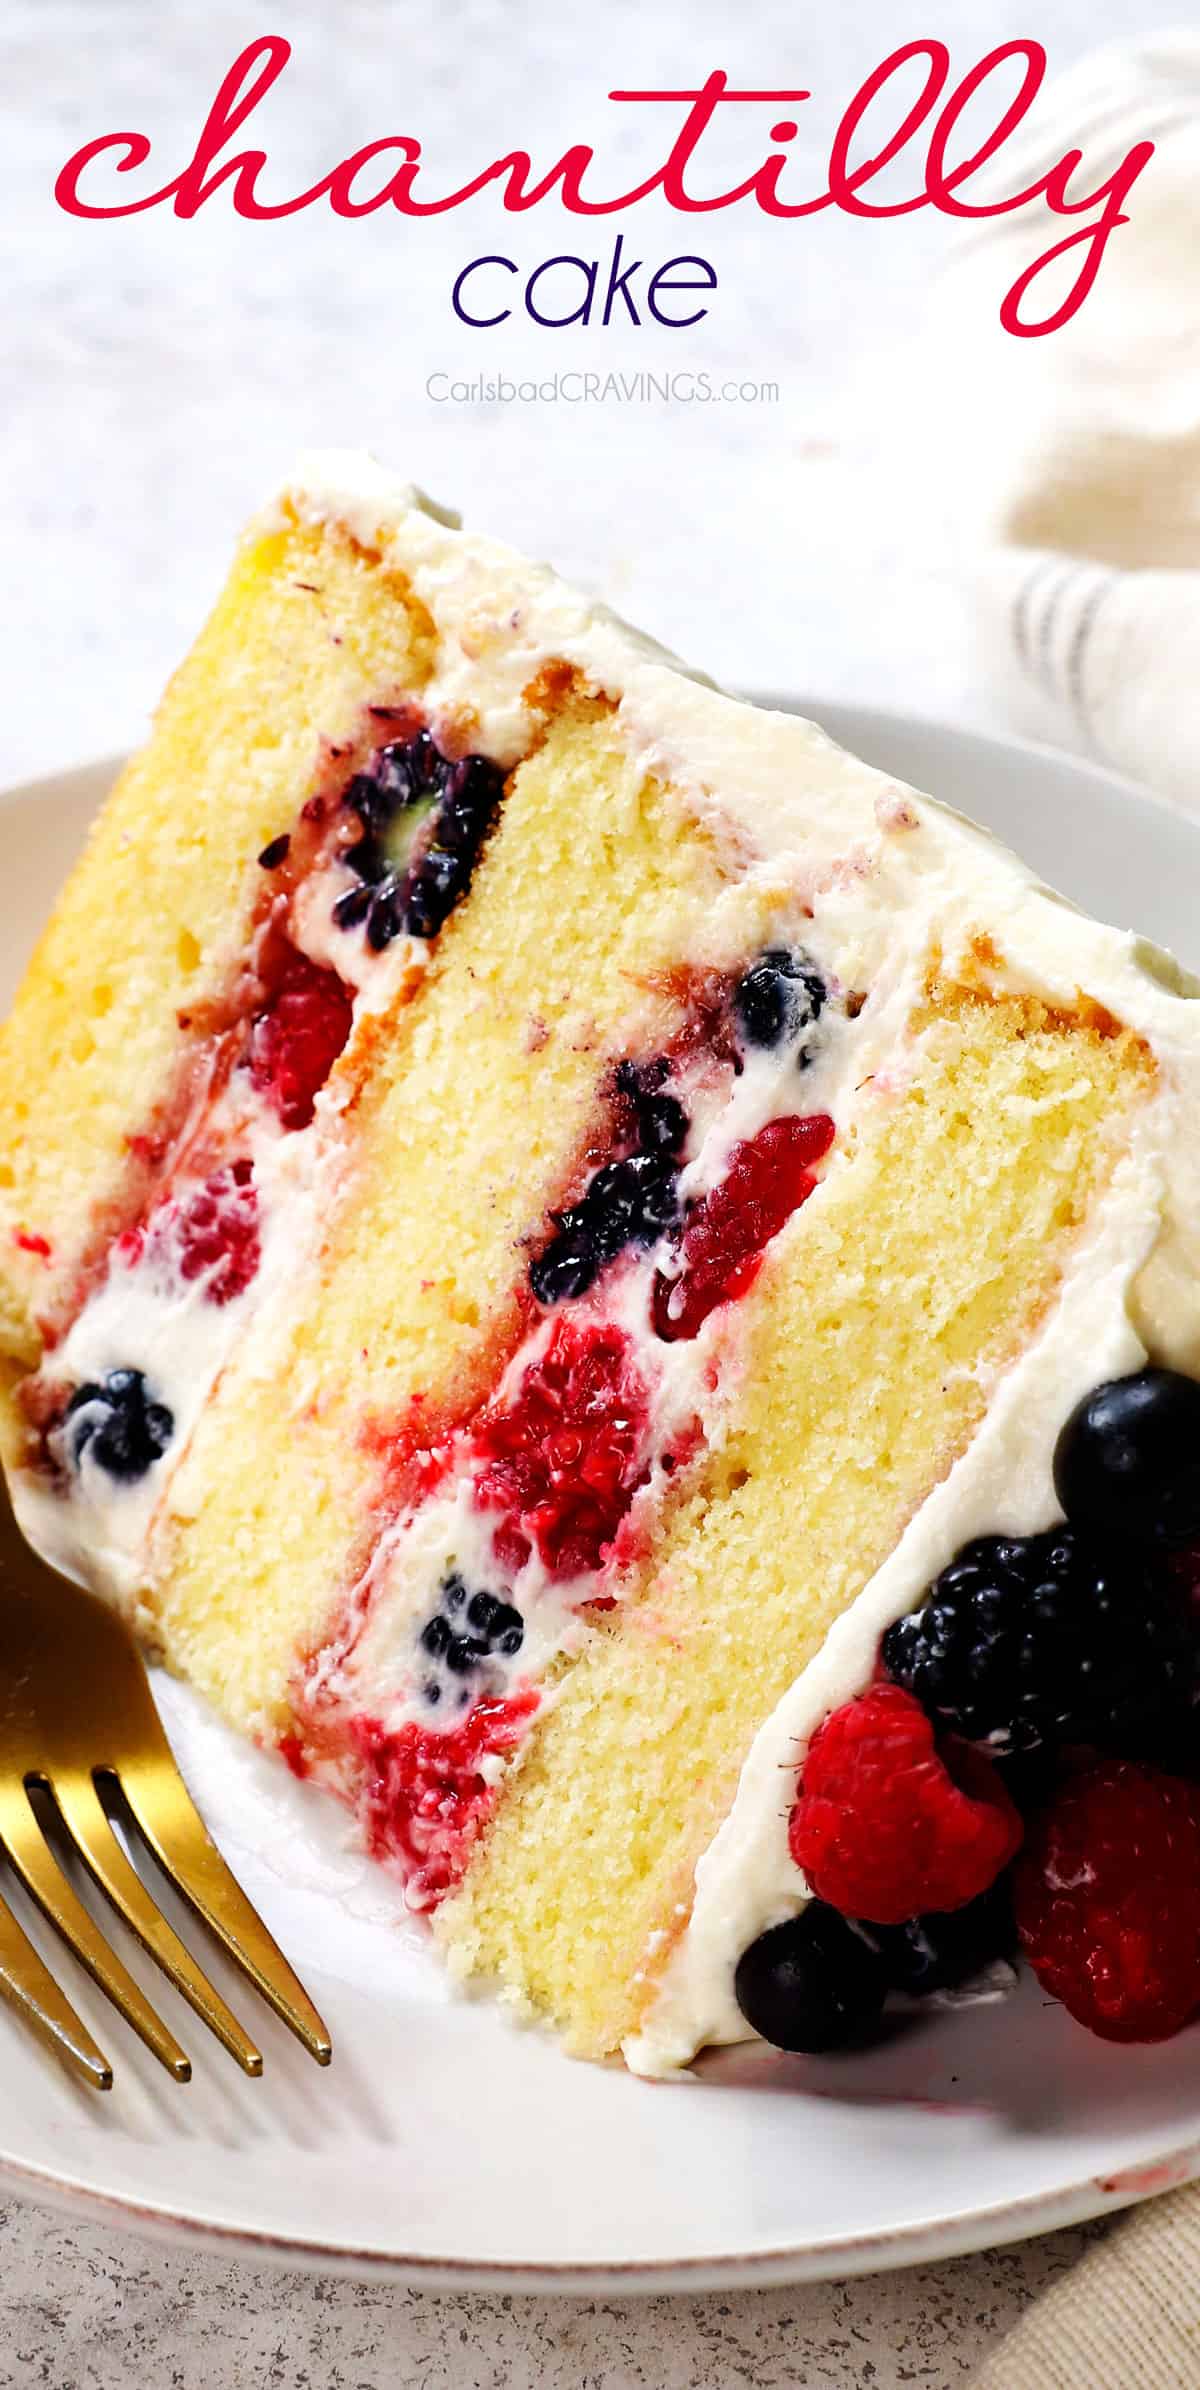 Chantilly cake layered with Chantilly cream and berries on a vanilla cake